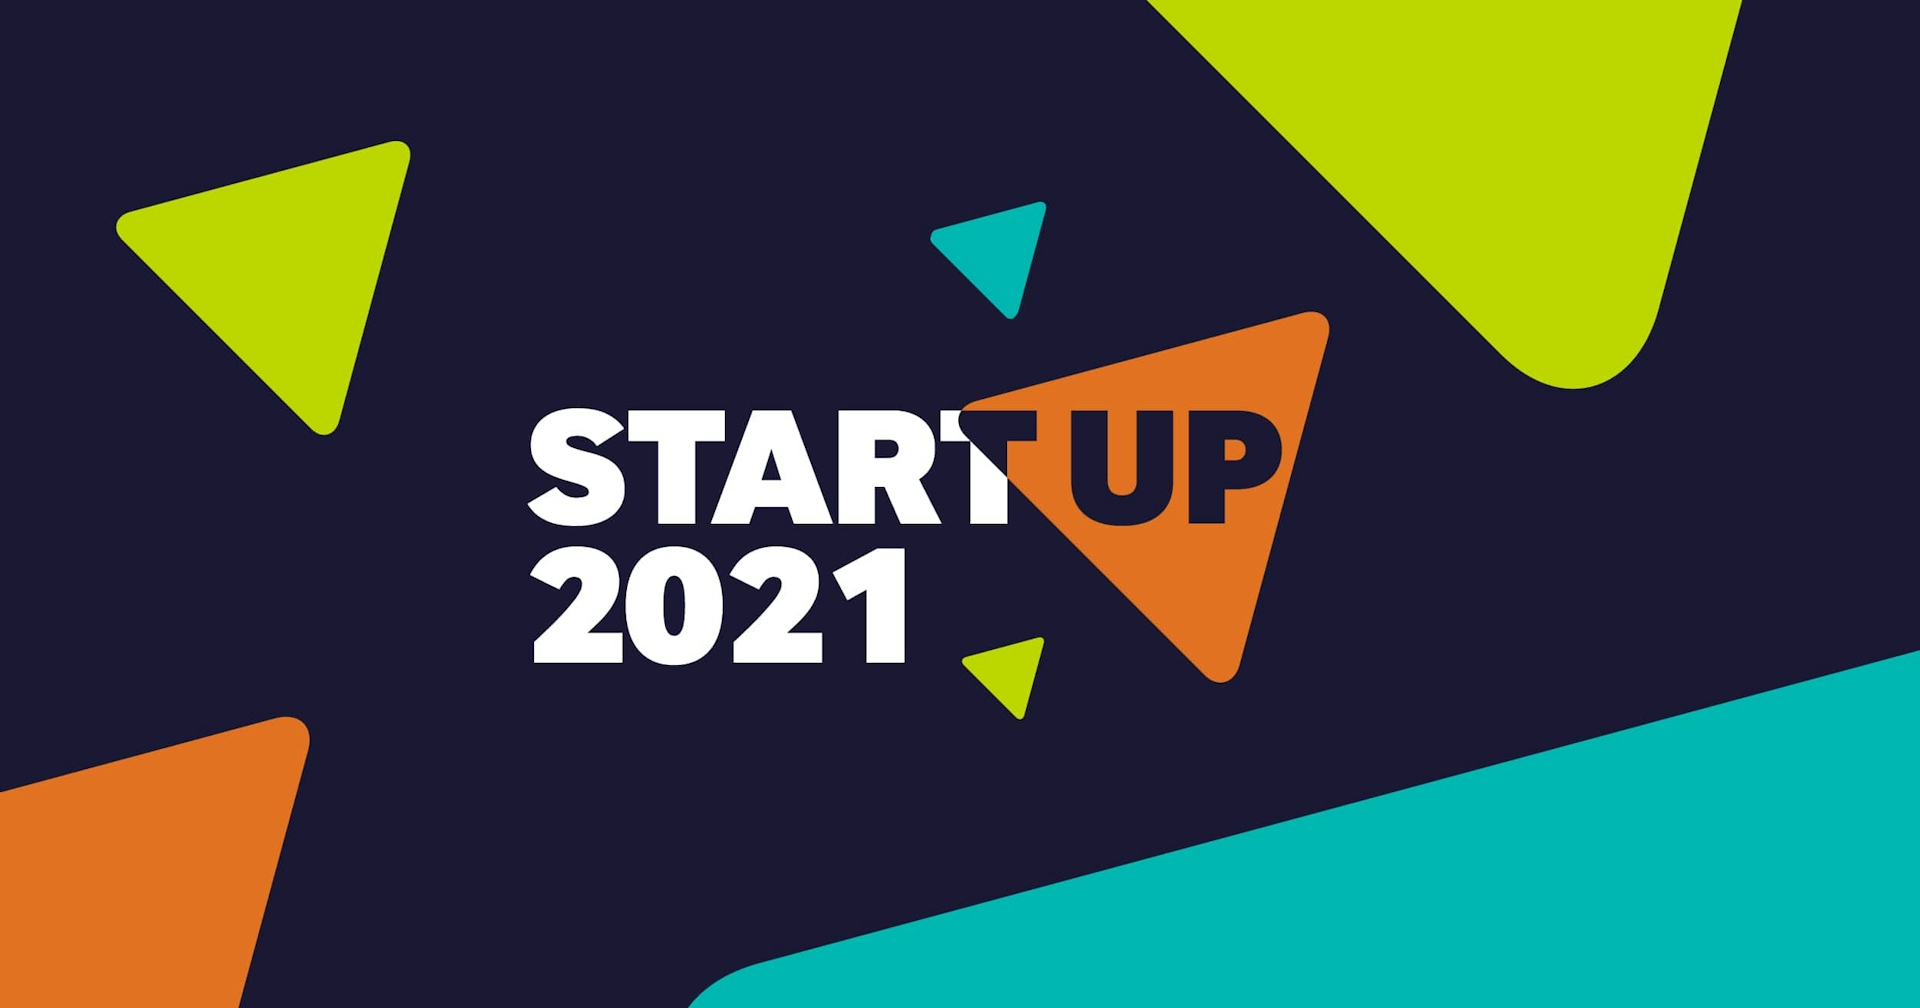 StartUp 2021: Re-watch the Business essentials zone sessions